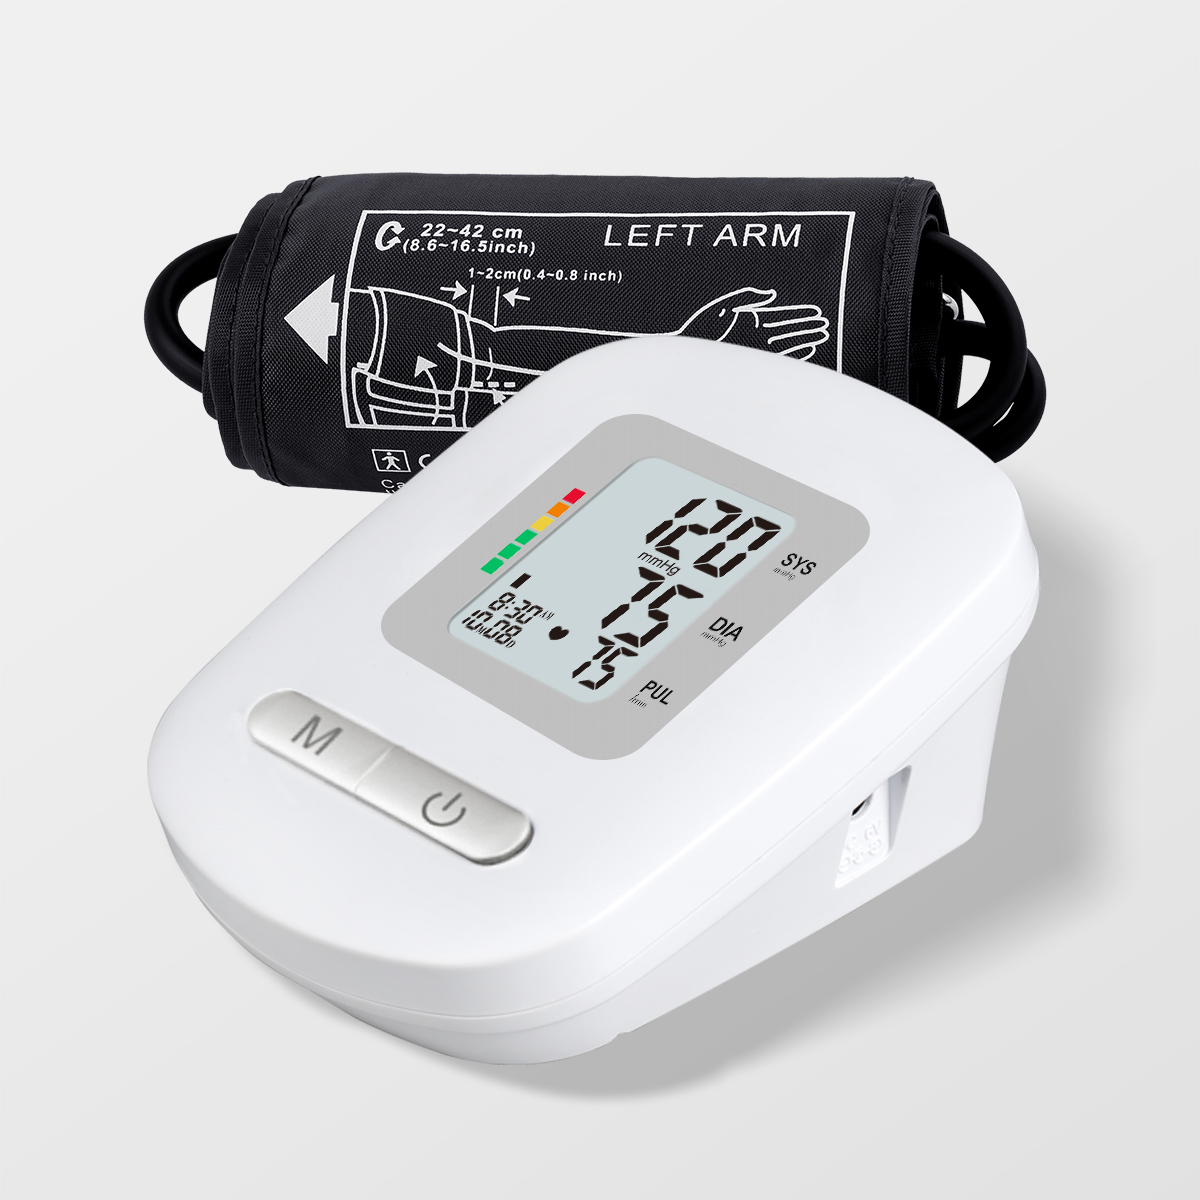 Home Healthcare Devices Manufacturer Upper Arm Blood Pressure Monitor